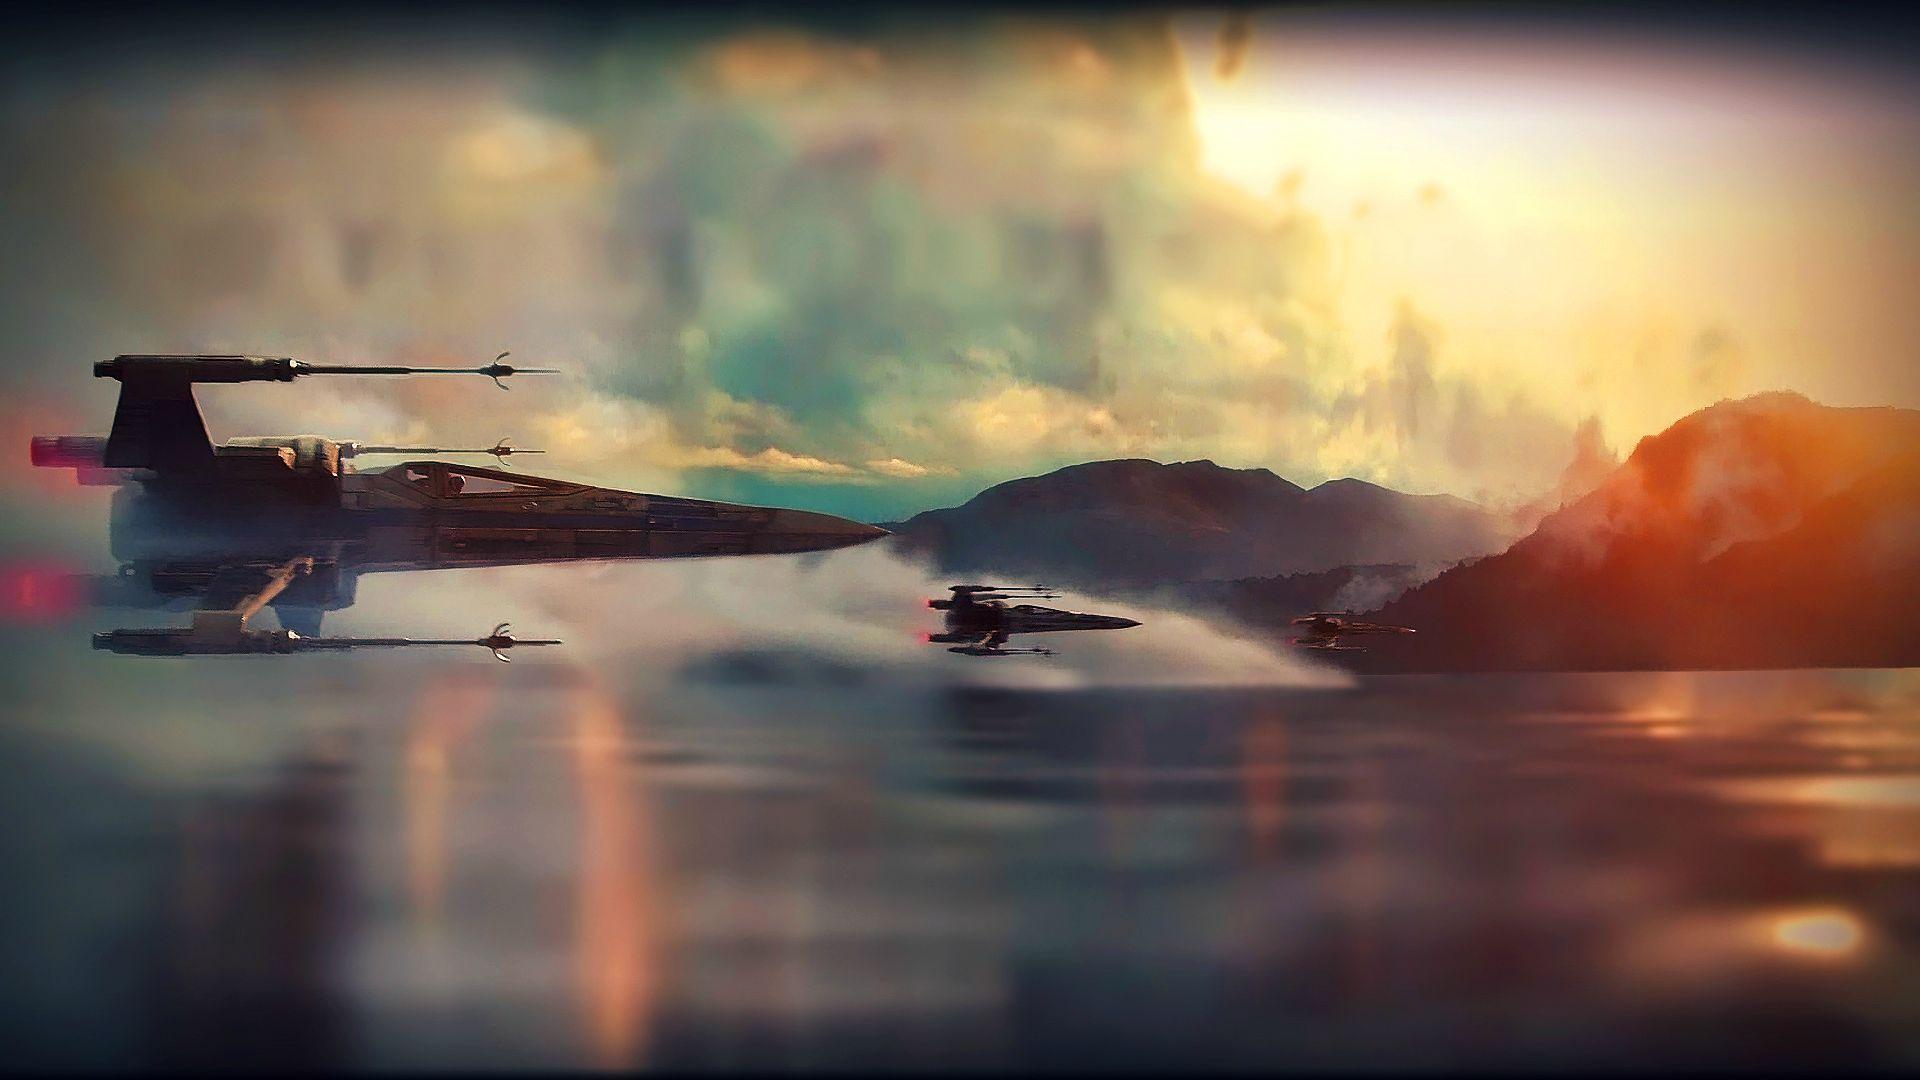 Star Wars Ep VII: The Force Awakens Teaser X Wing Super Saturated